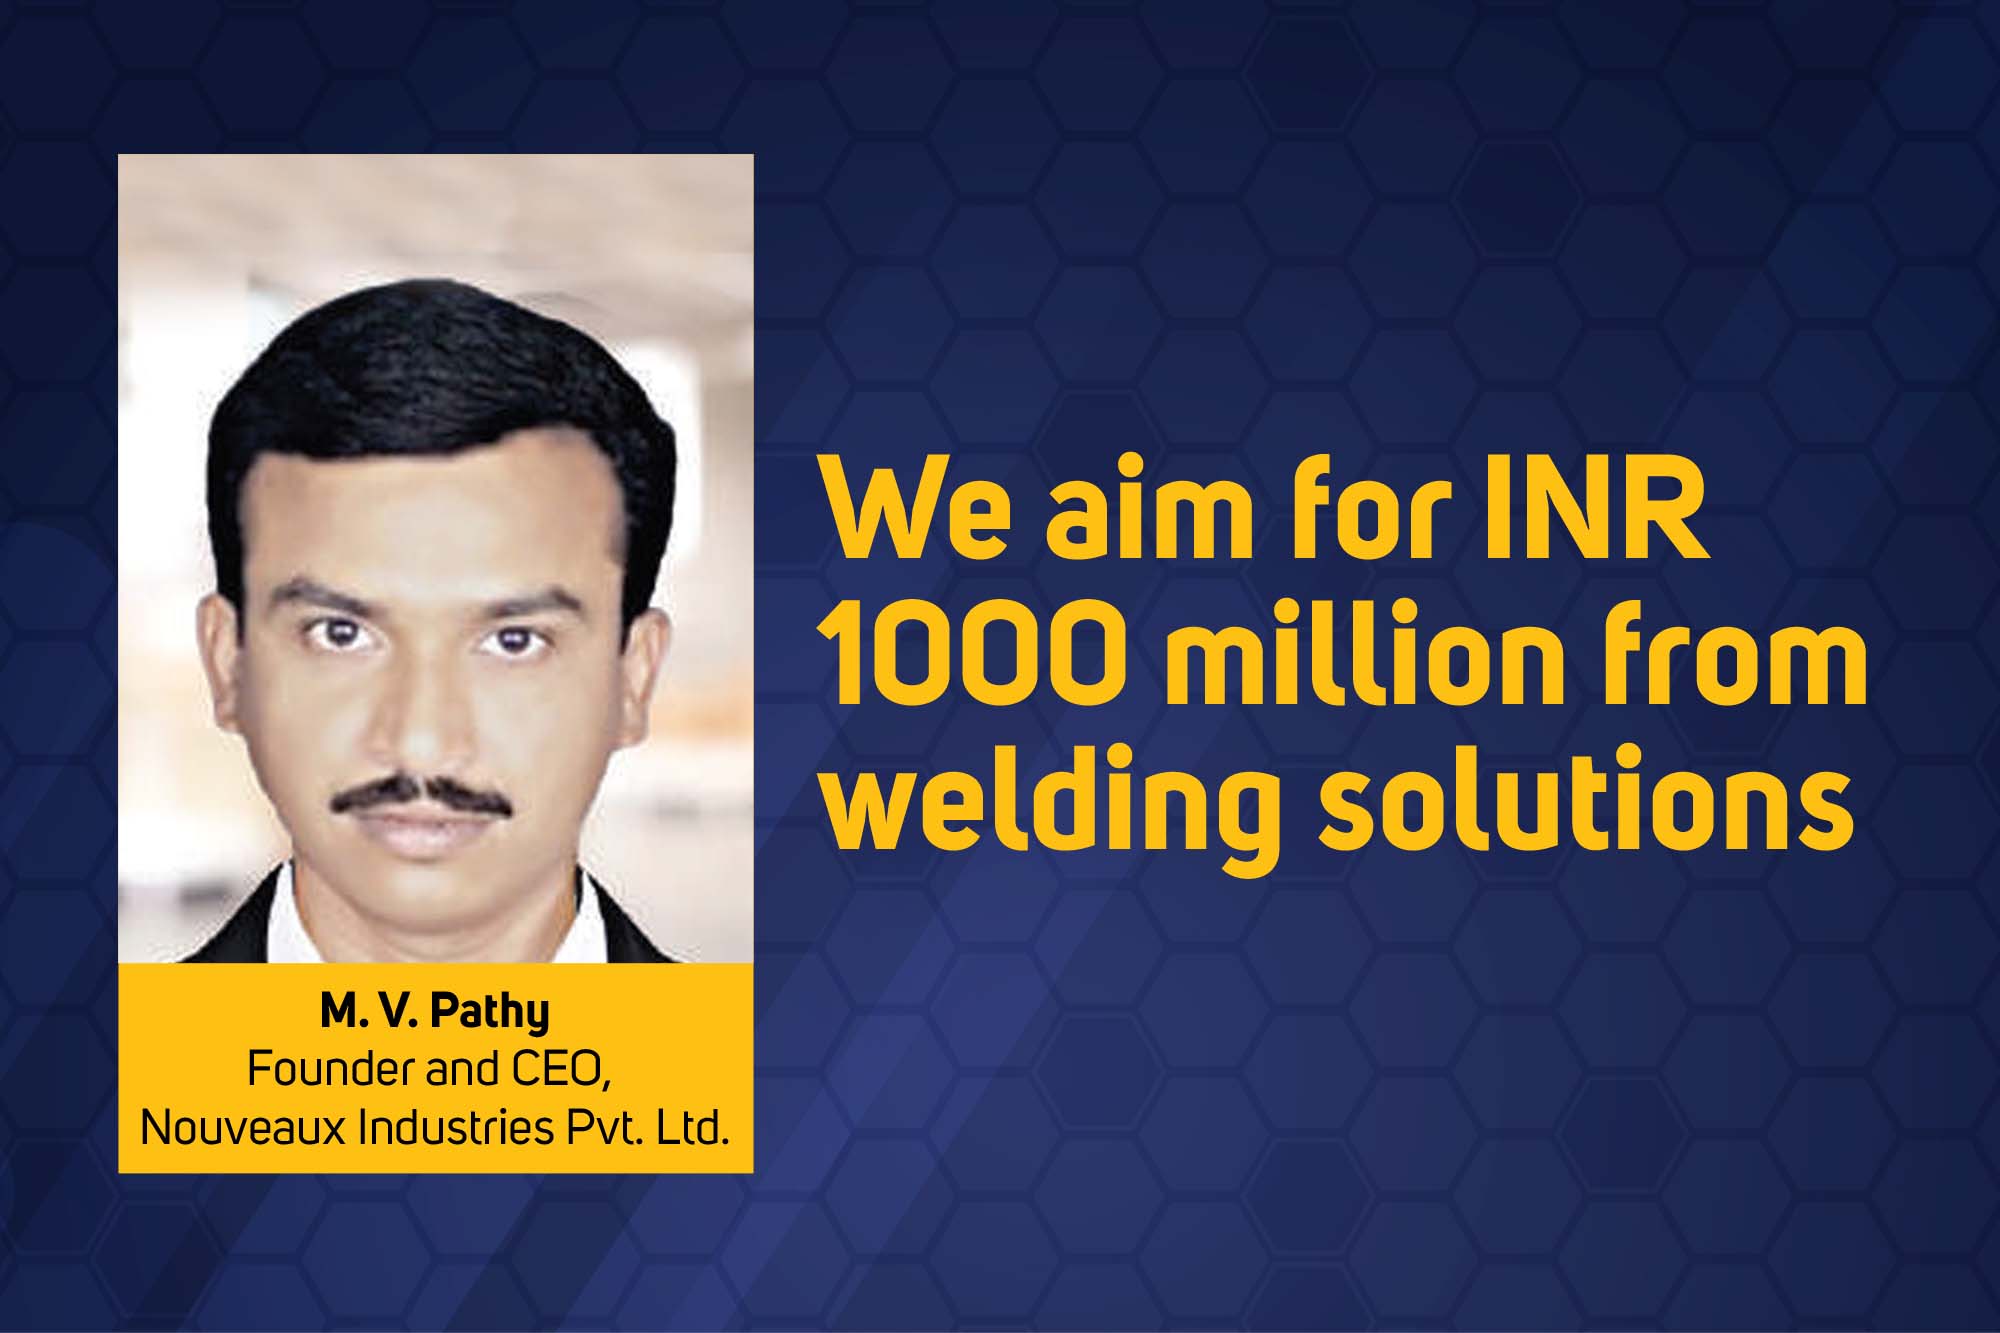 We aim for INR 1000 million from welding solutions